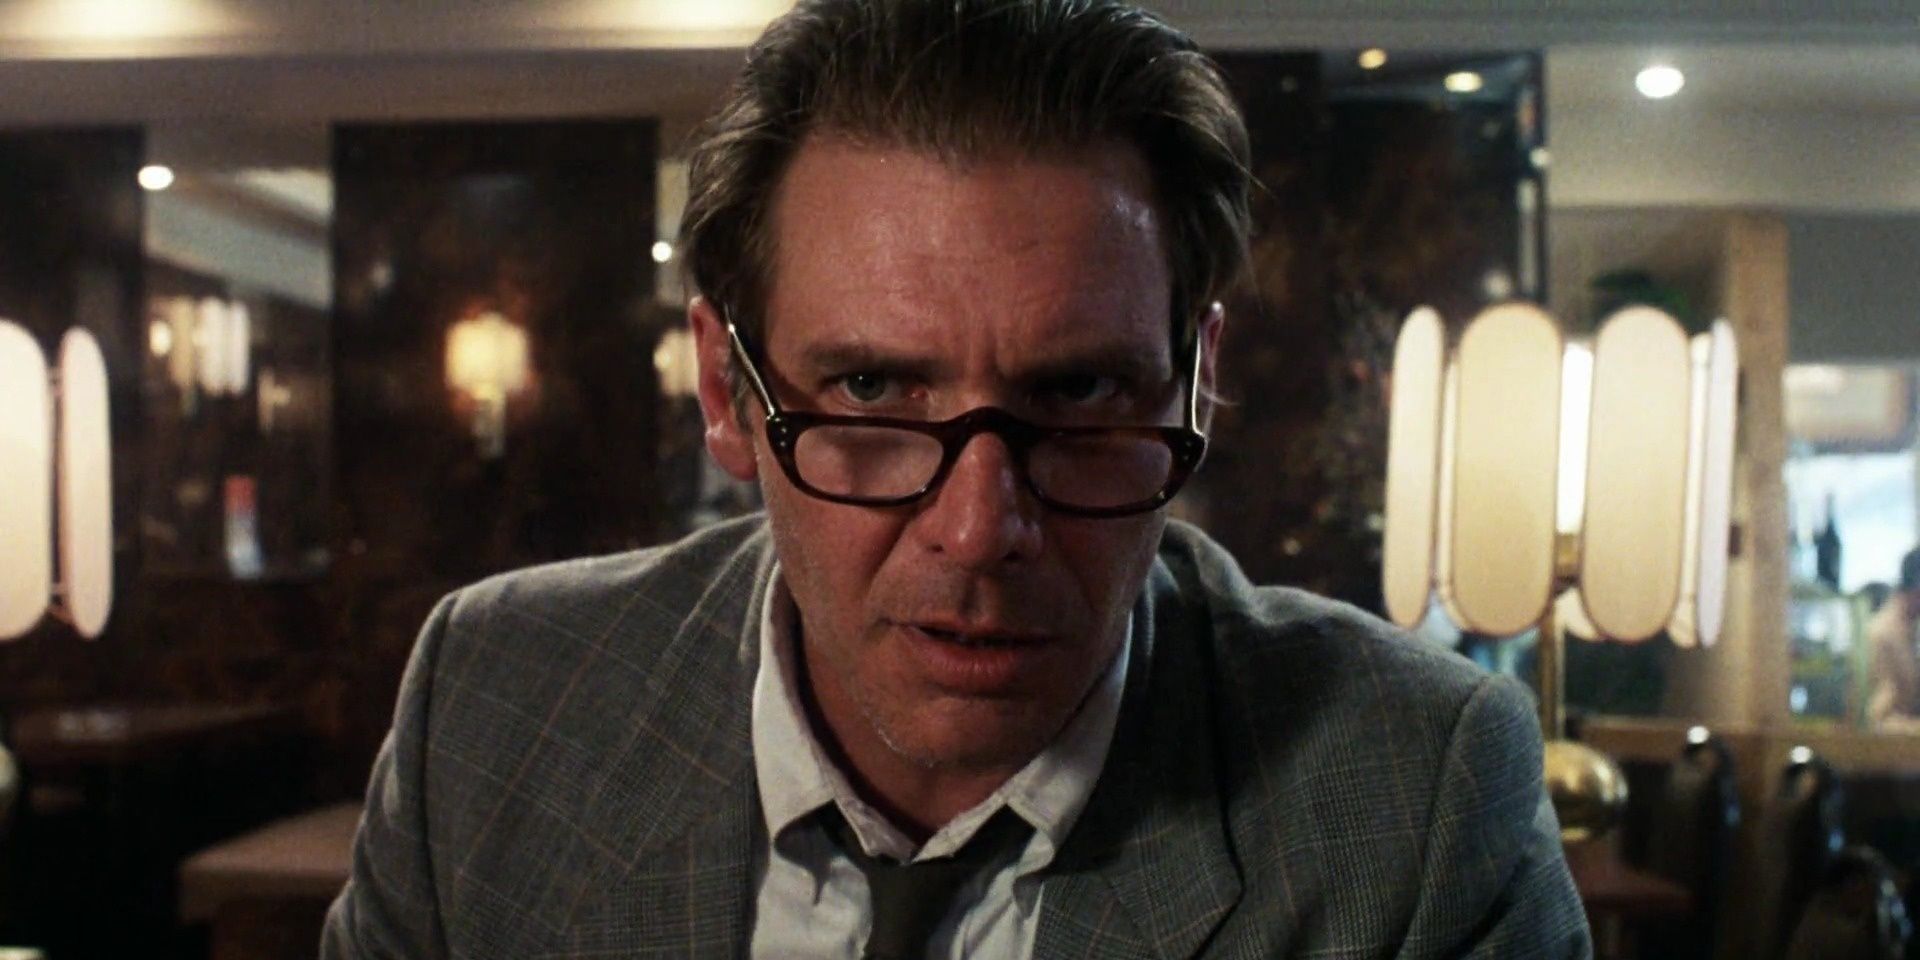 A close-up of a man looking nervous in the movie Frantic